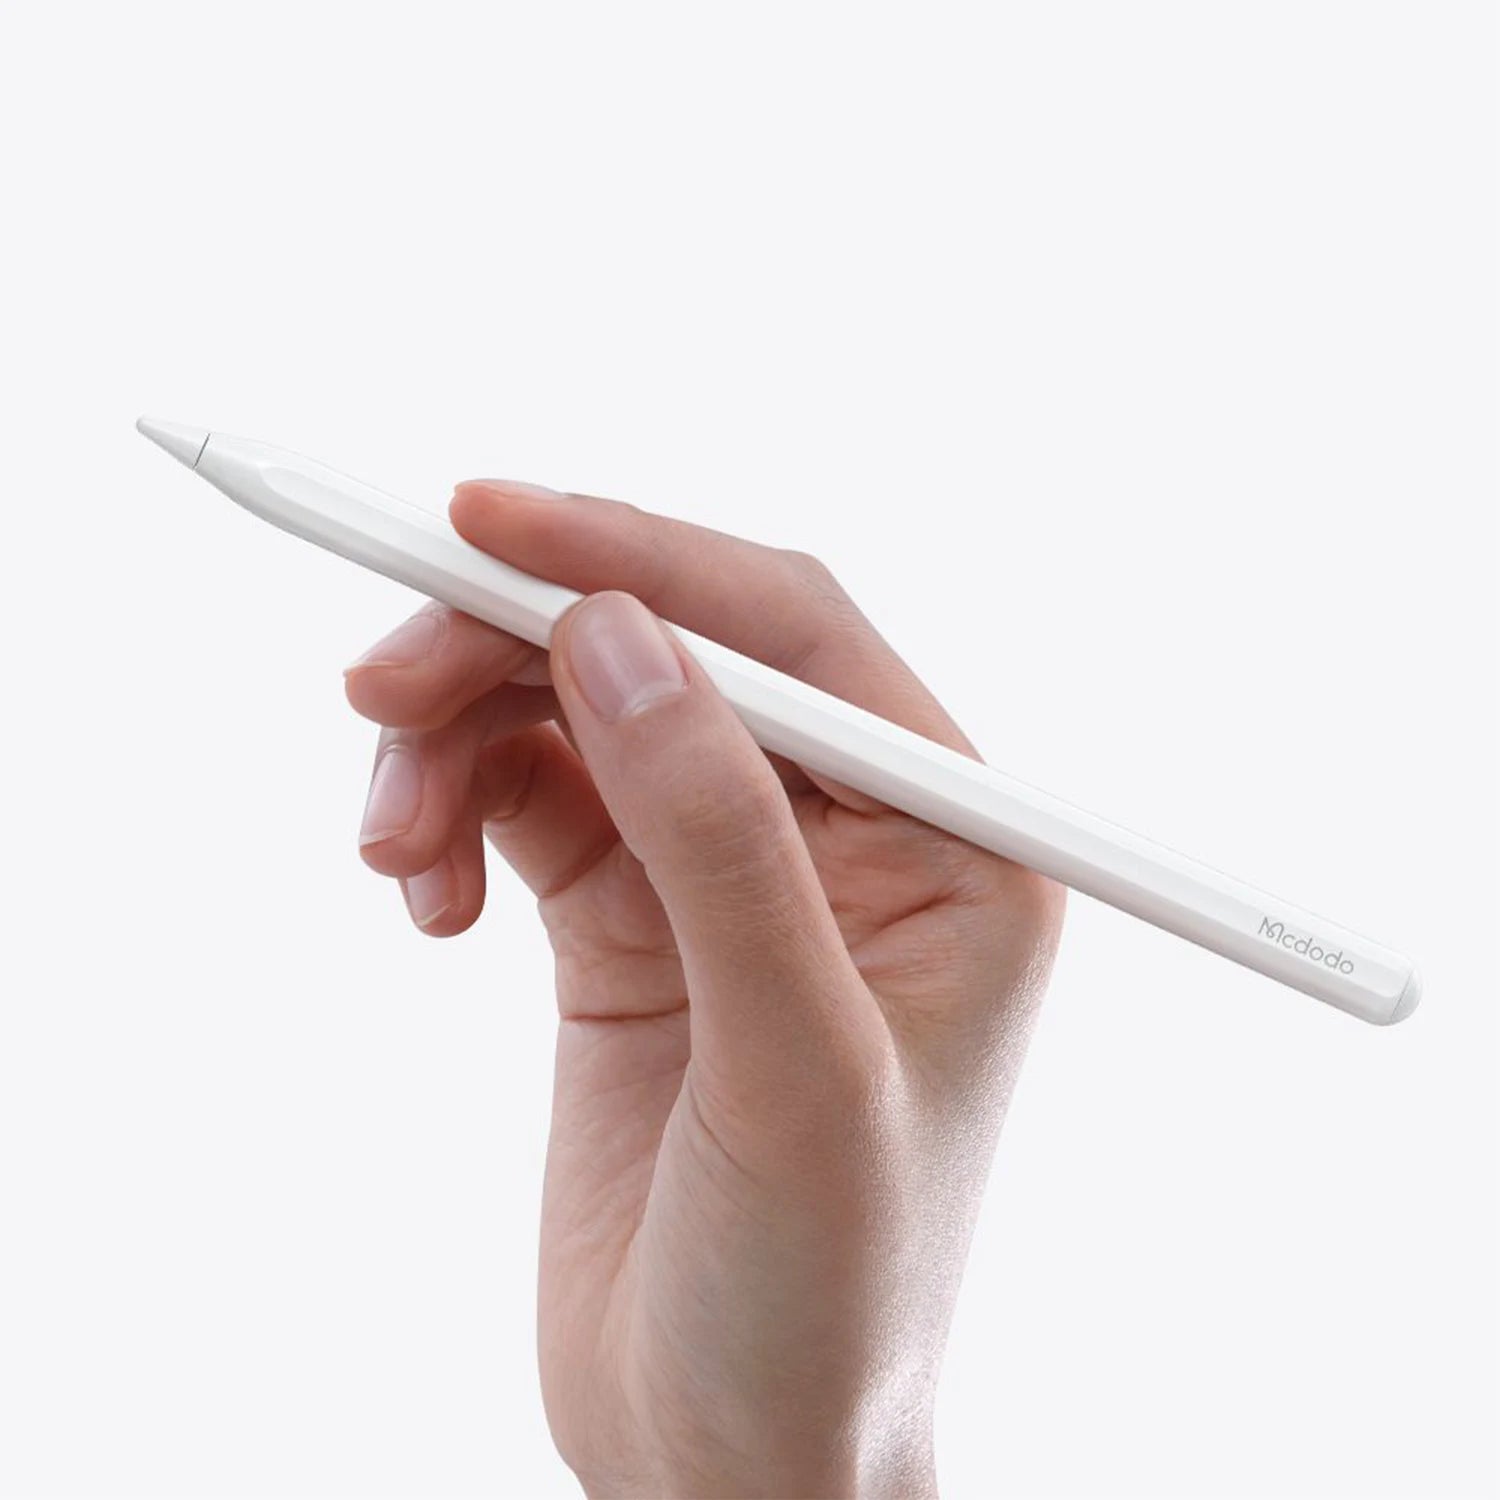 Mcdodo Stylus Pen for iPad (With Magnetic Charging Cable), White